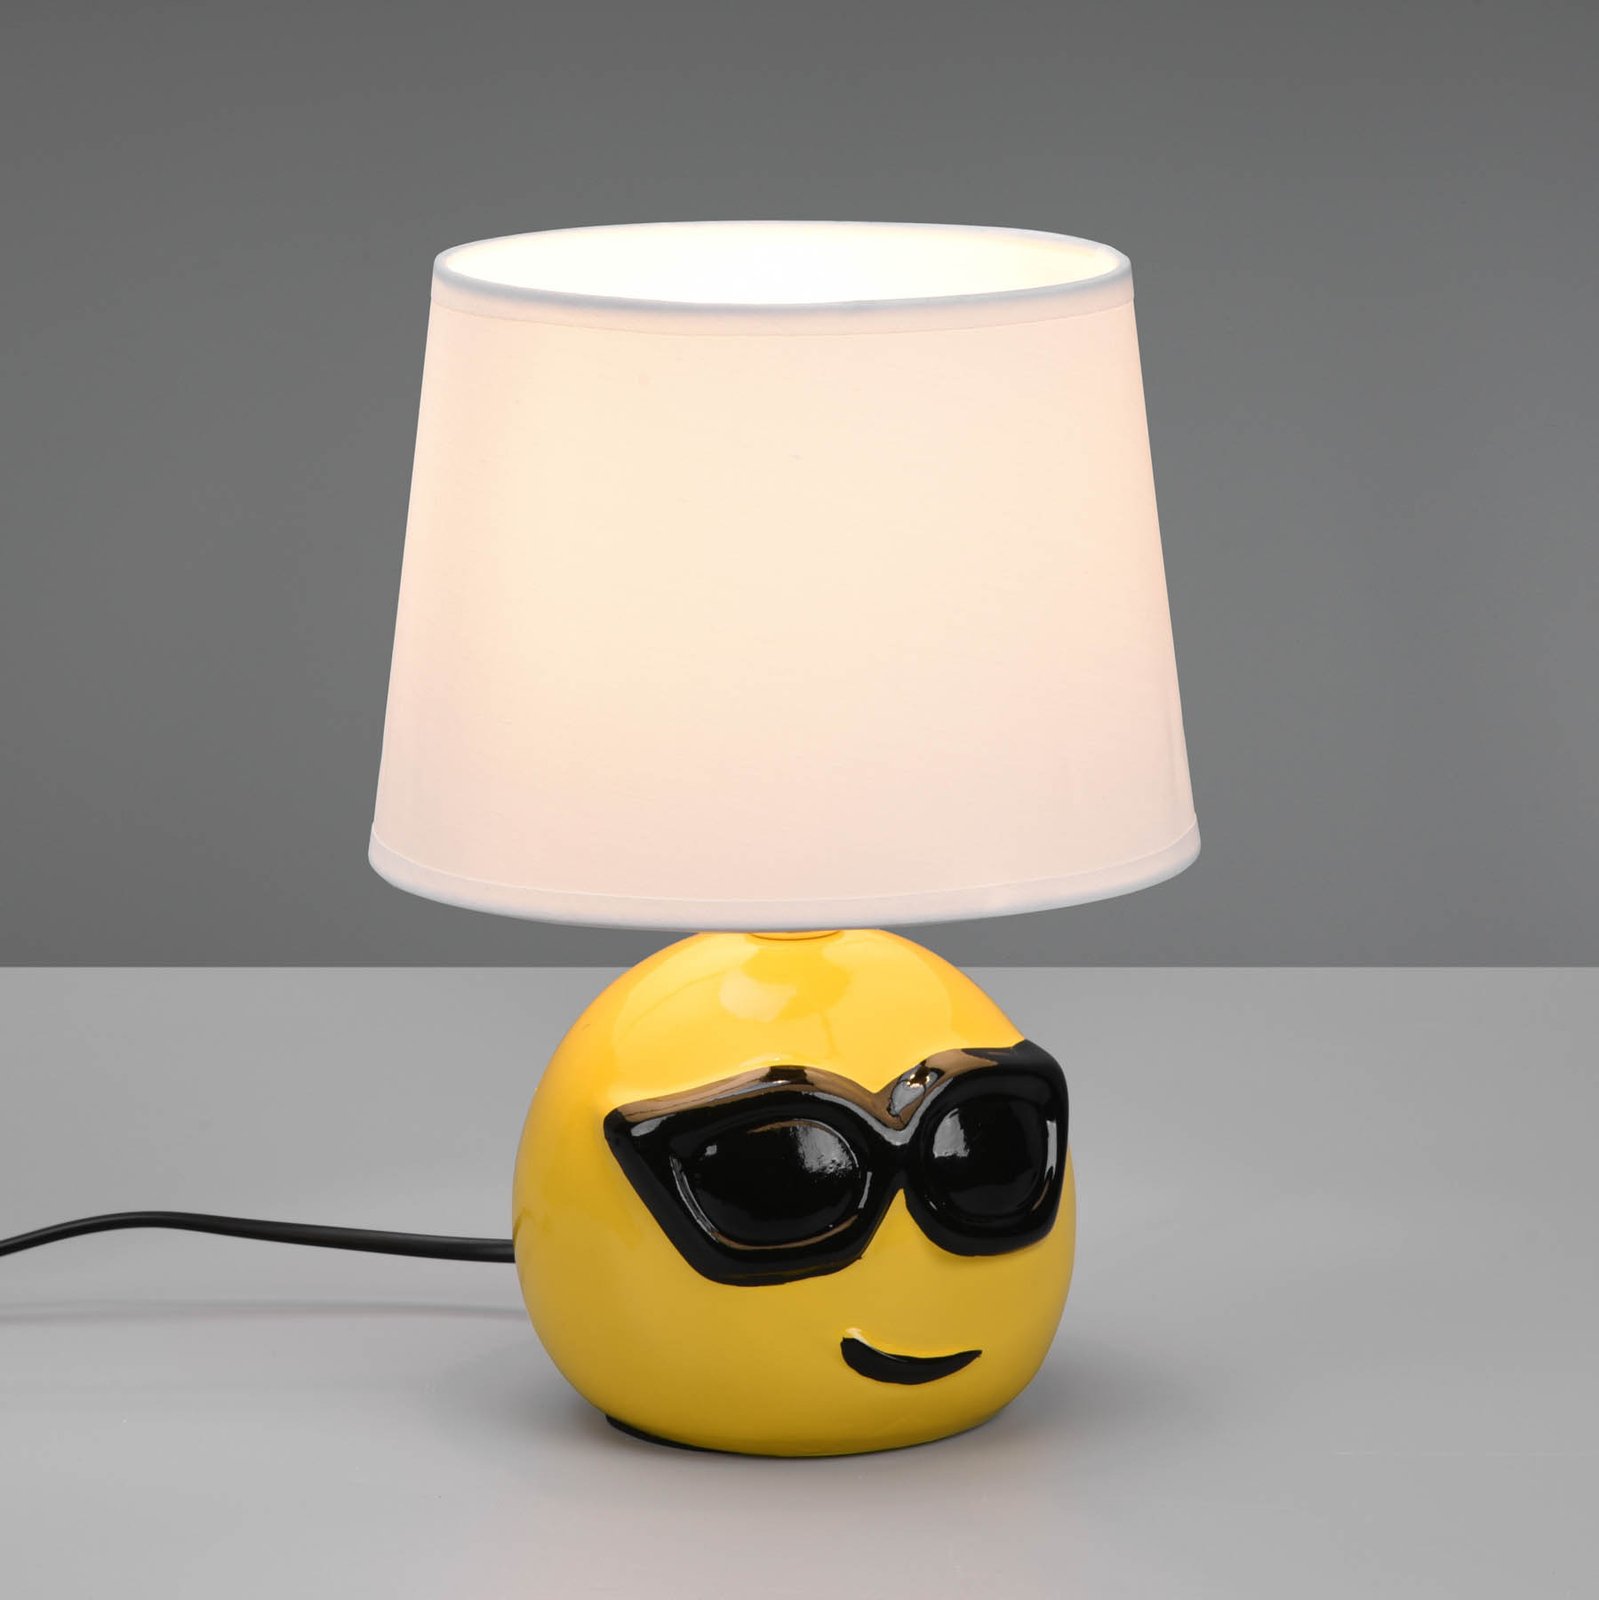 Coolio table lamp, smiley face, white lampshade